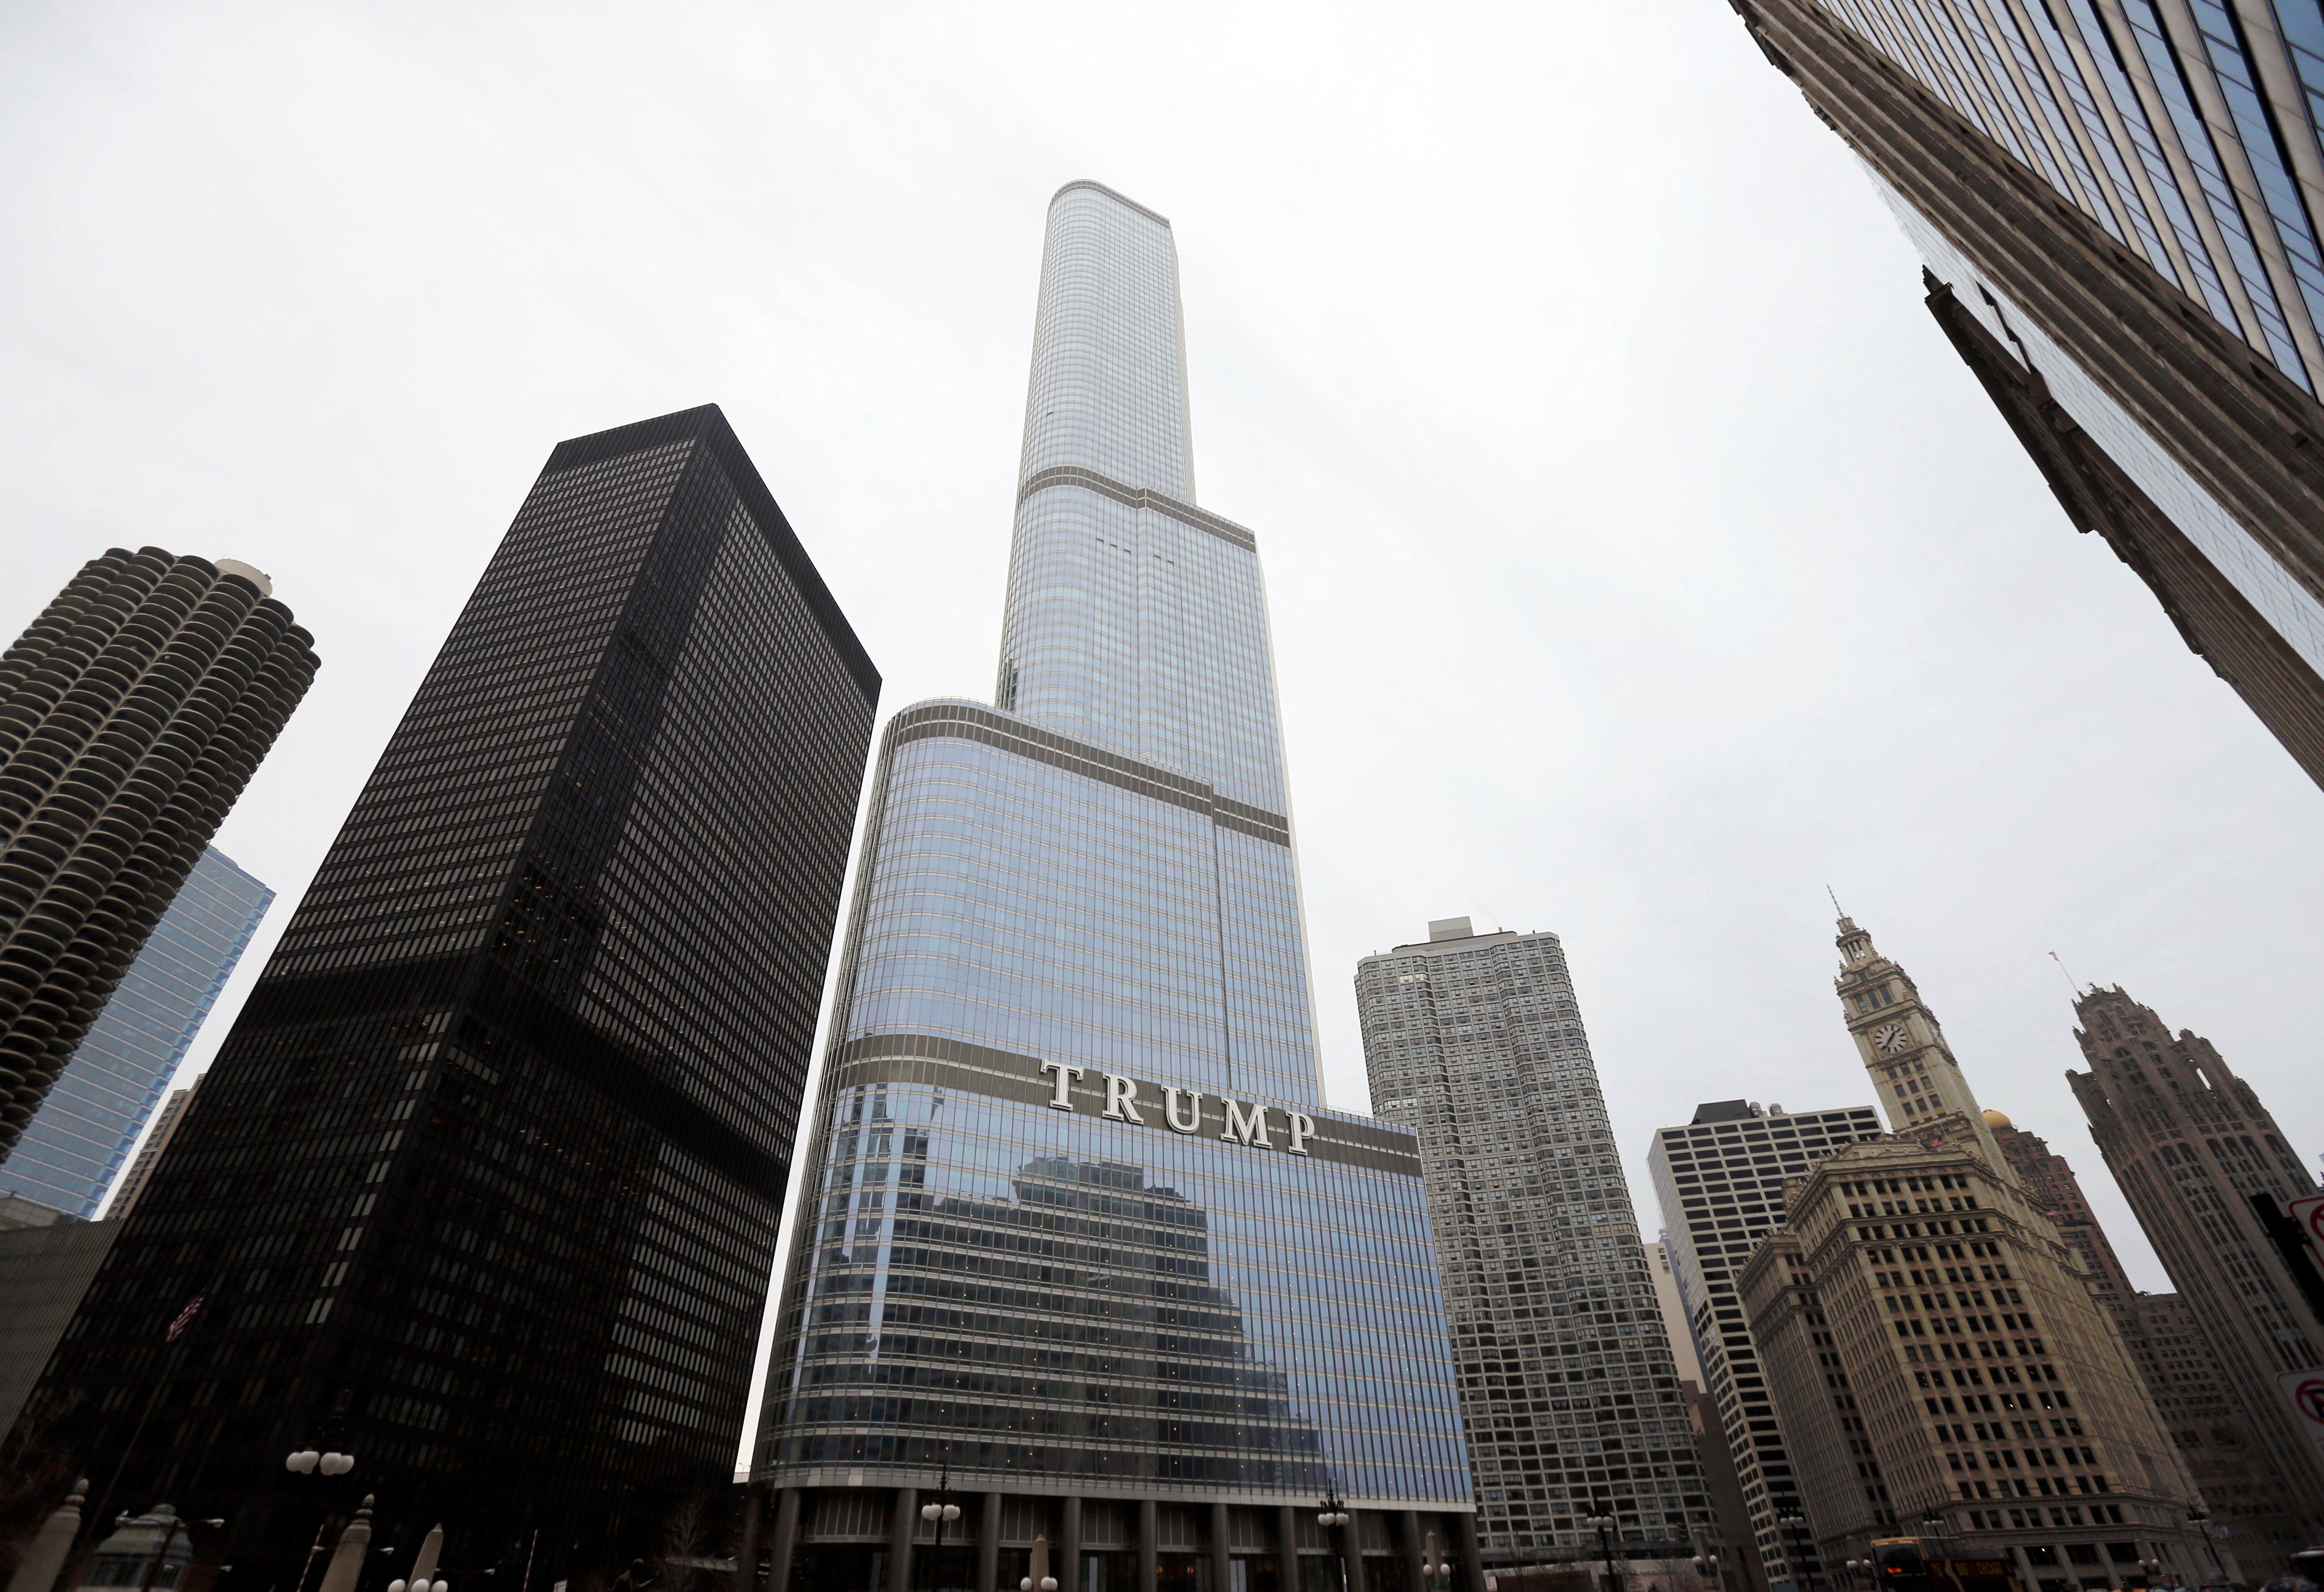 The Trump International Hotel and Tower in Chicago, which was completed in 2009, has been considered to be a massive money loser over the years